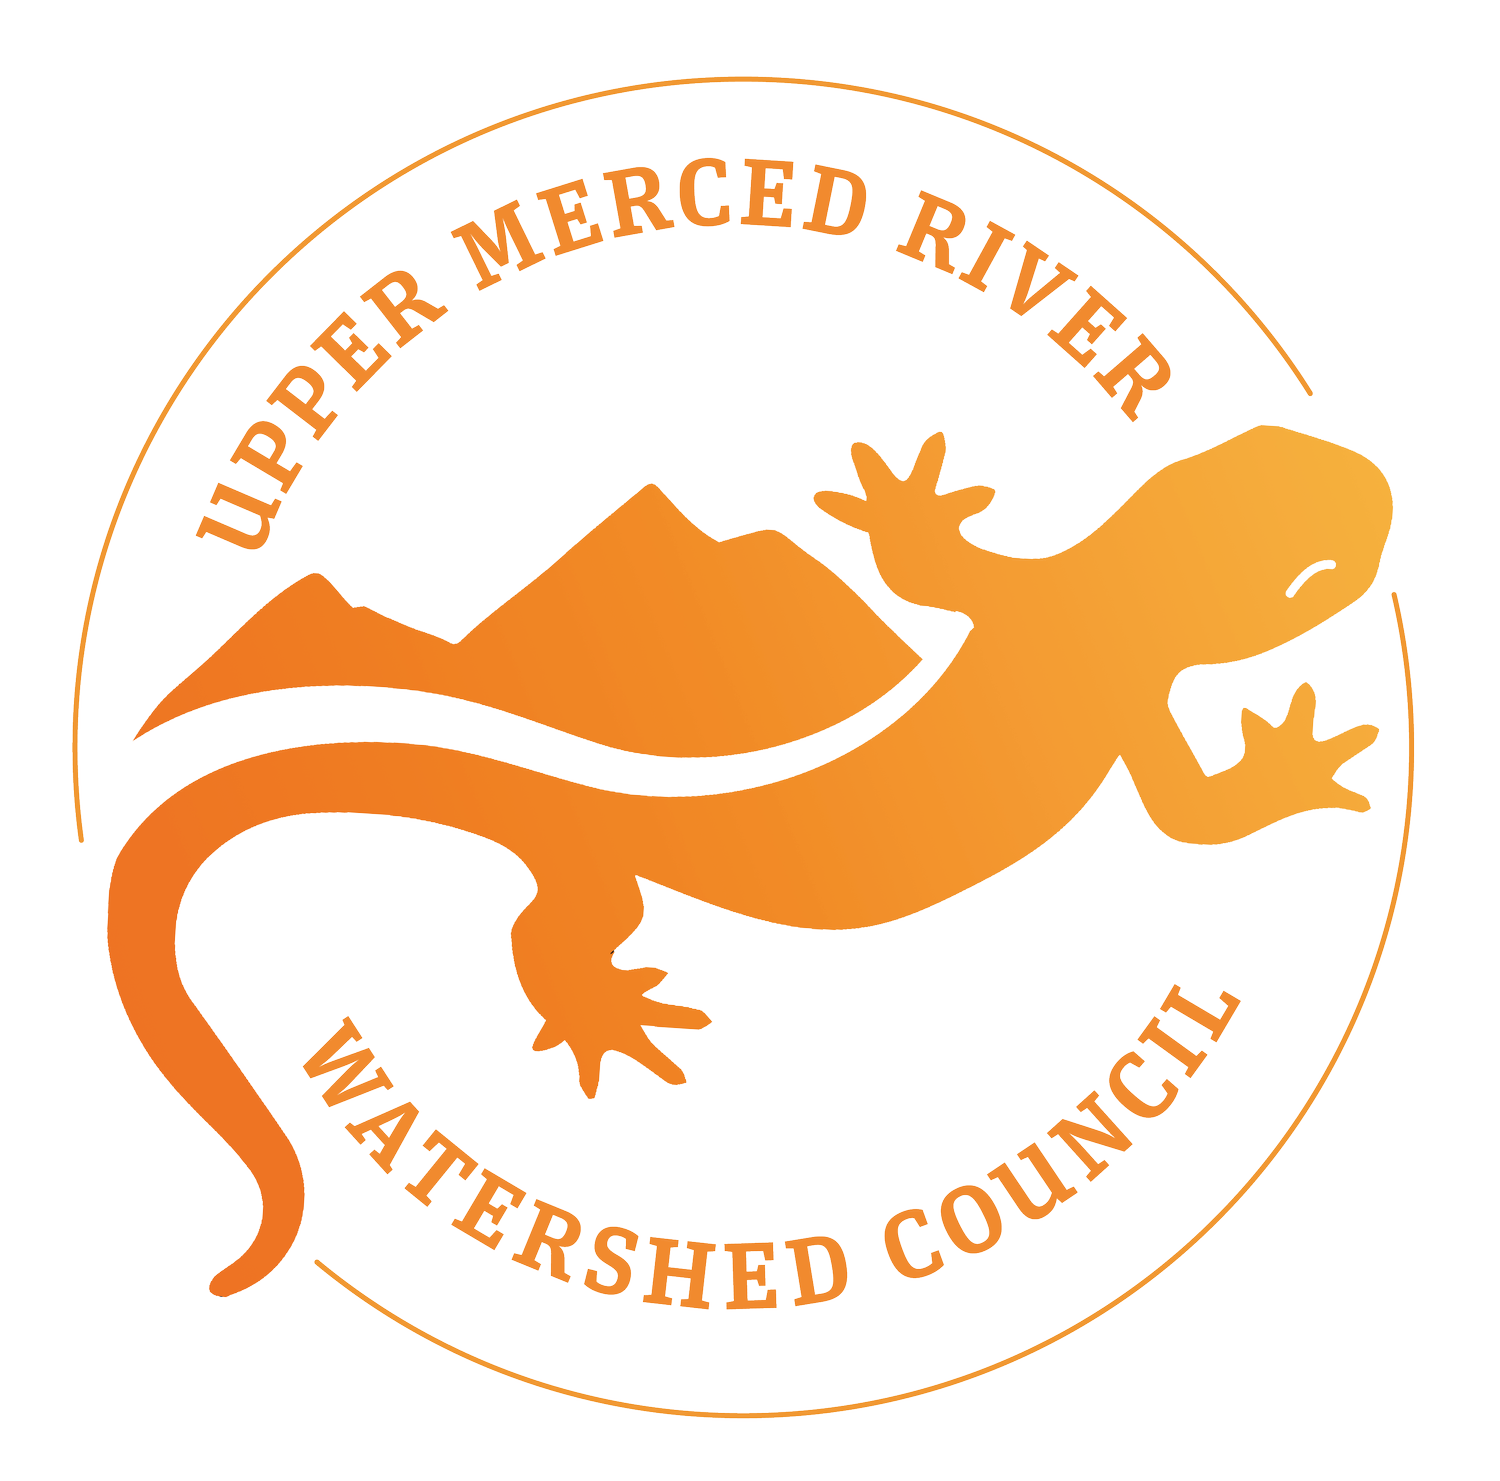 Upper Merced River Watershed Council